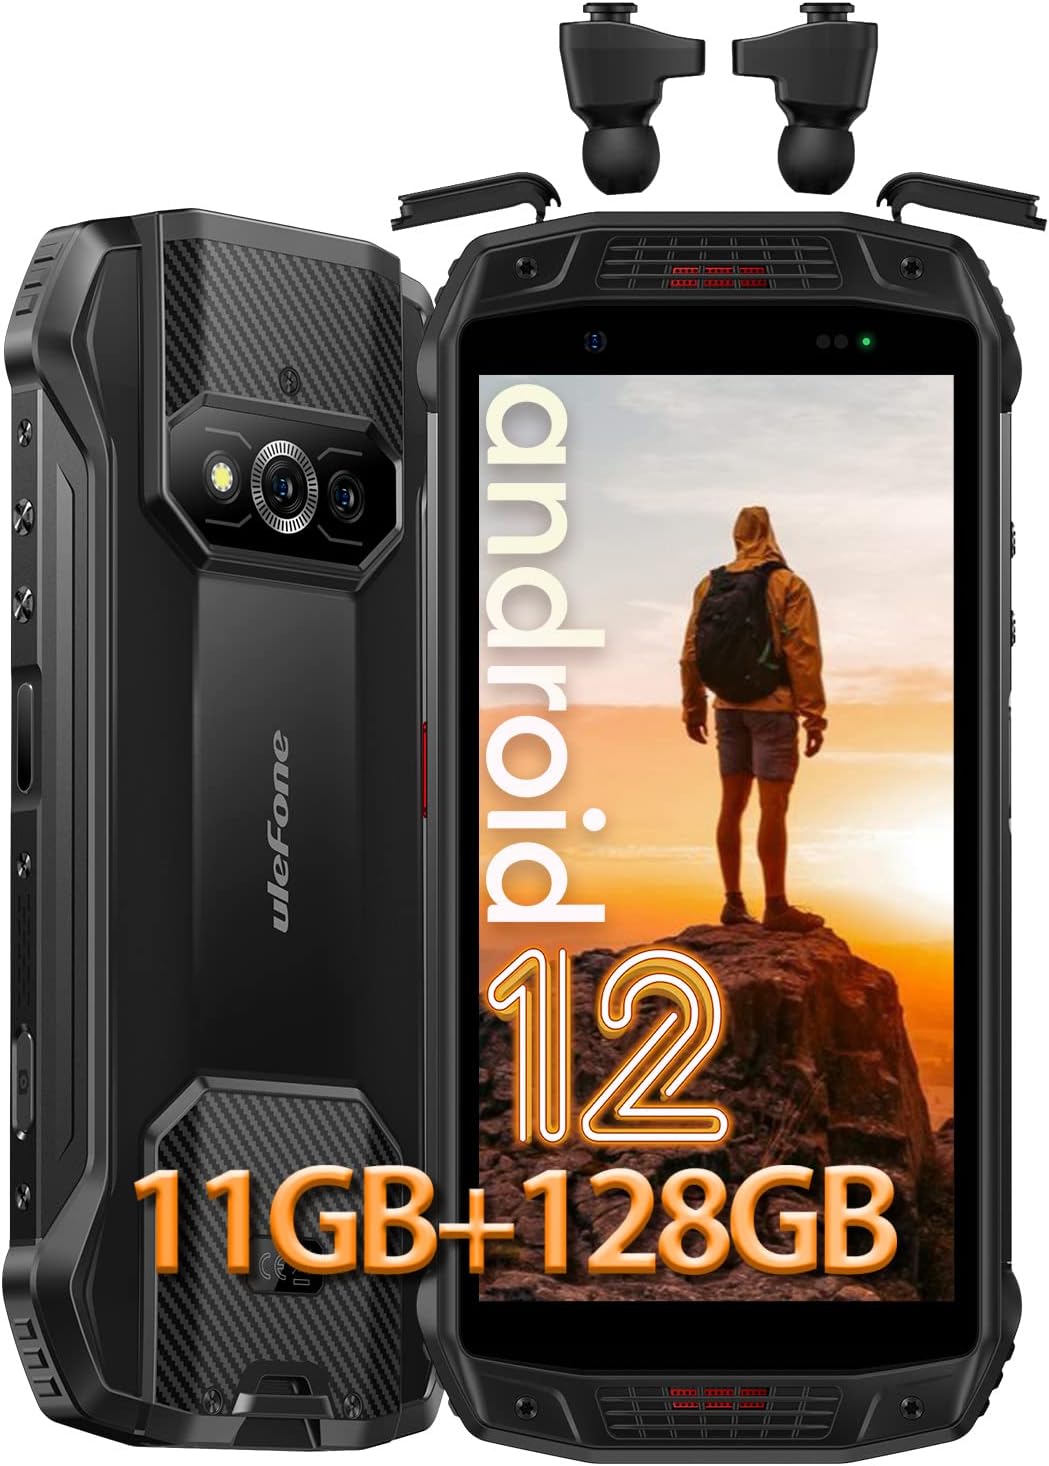 Ulefone Android 12 Armor 15 Rugged Phone Unlocked, IP68/IP69K, Built-in TWS Earbuds, 11GB+128GB, 4-Day Battery, 16MP+12MP+13MP Camera, Dual Loud Speakers Dual 4G, Octa-core, OTG, GPS, Black